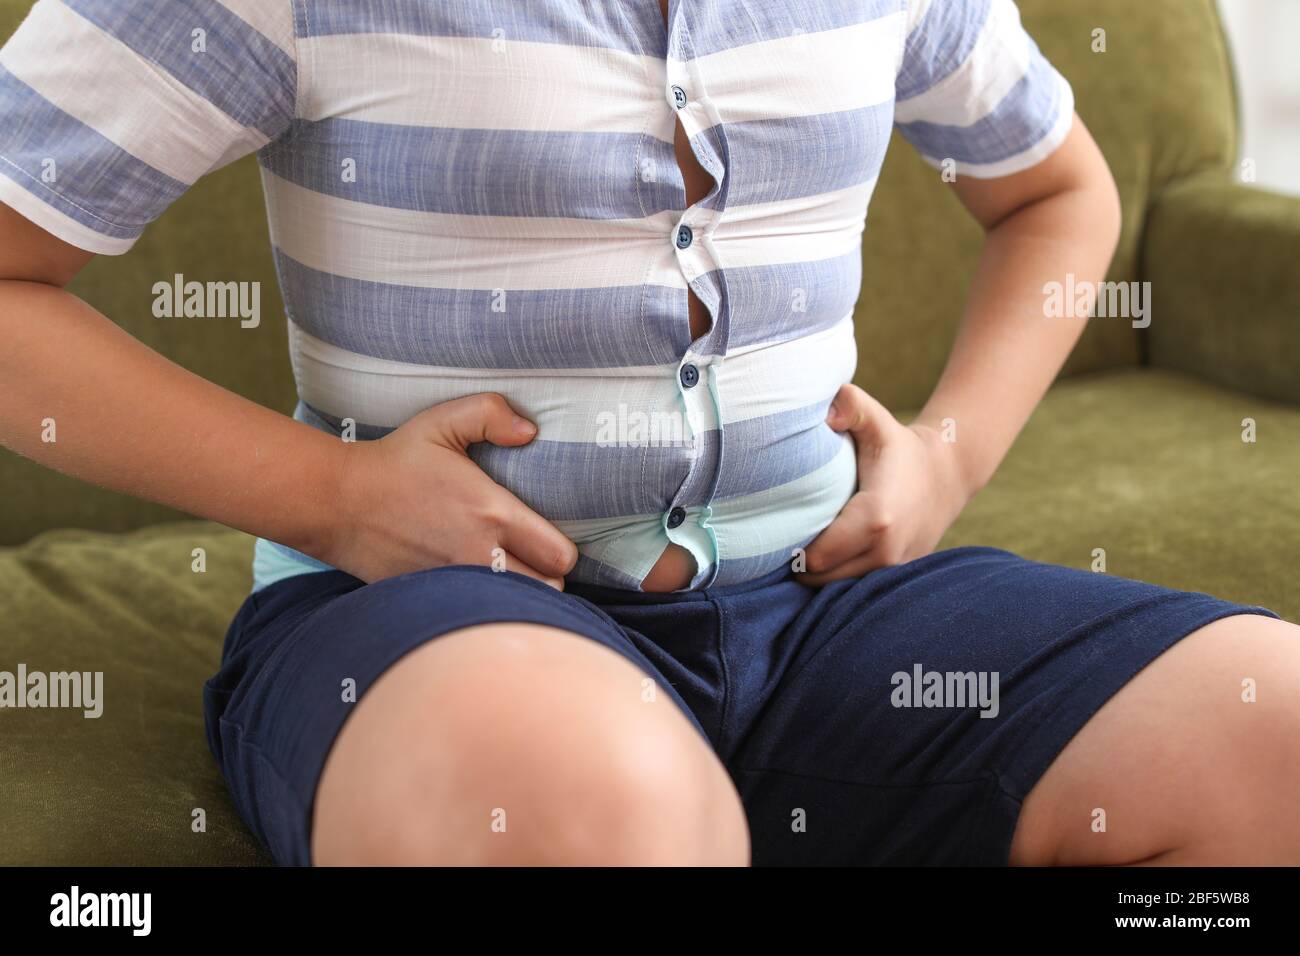 Overweight boy in tight clothes at home Stock Photo